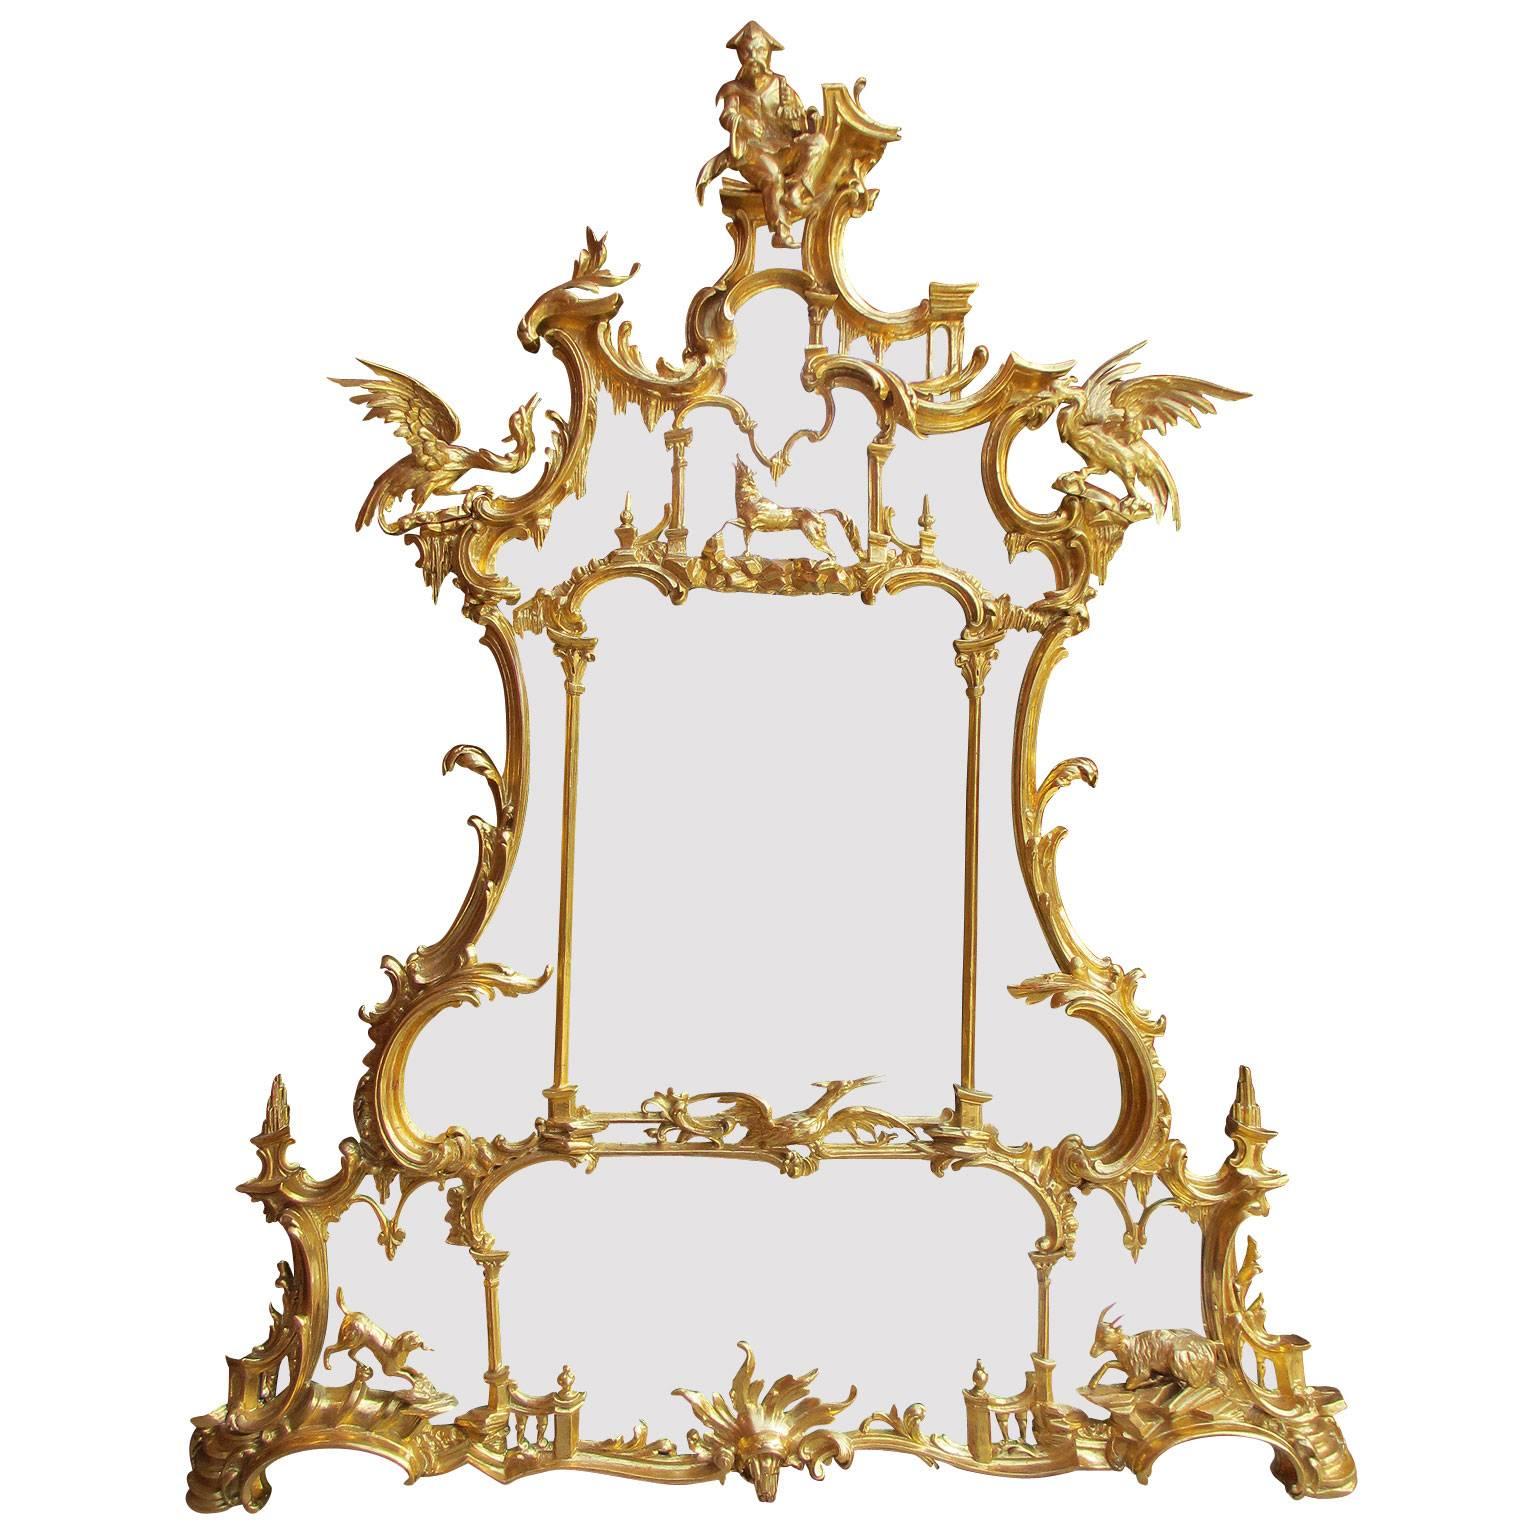 Fine 19th Century Chippendale Style Gilt-Wood Carved Mirror after Thomas Johnson